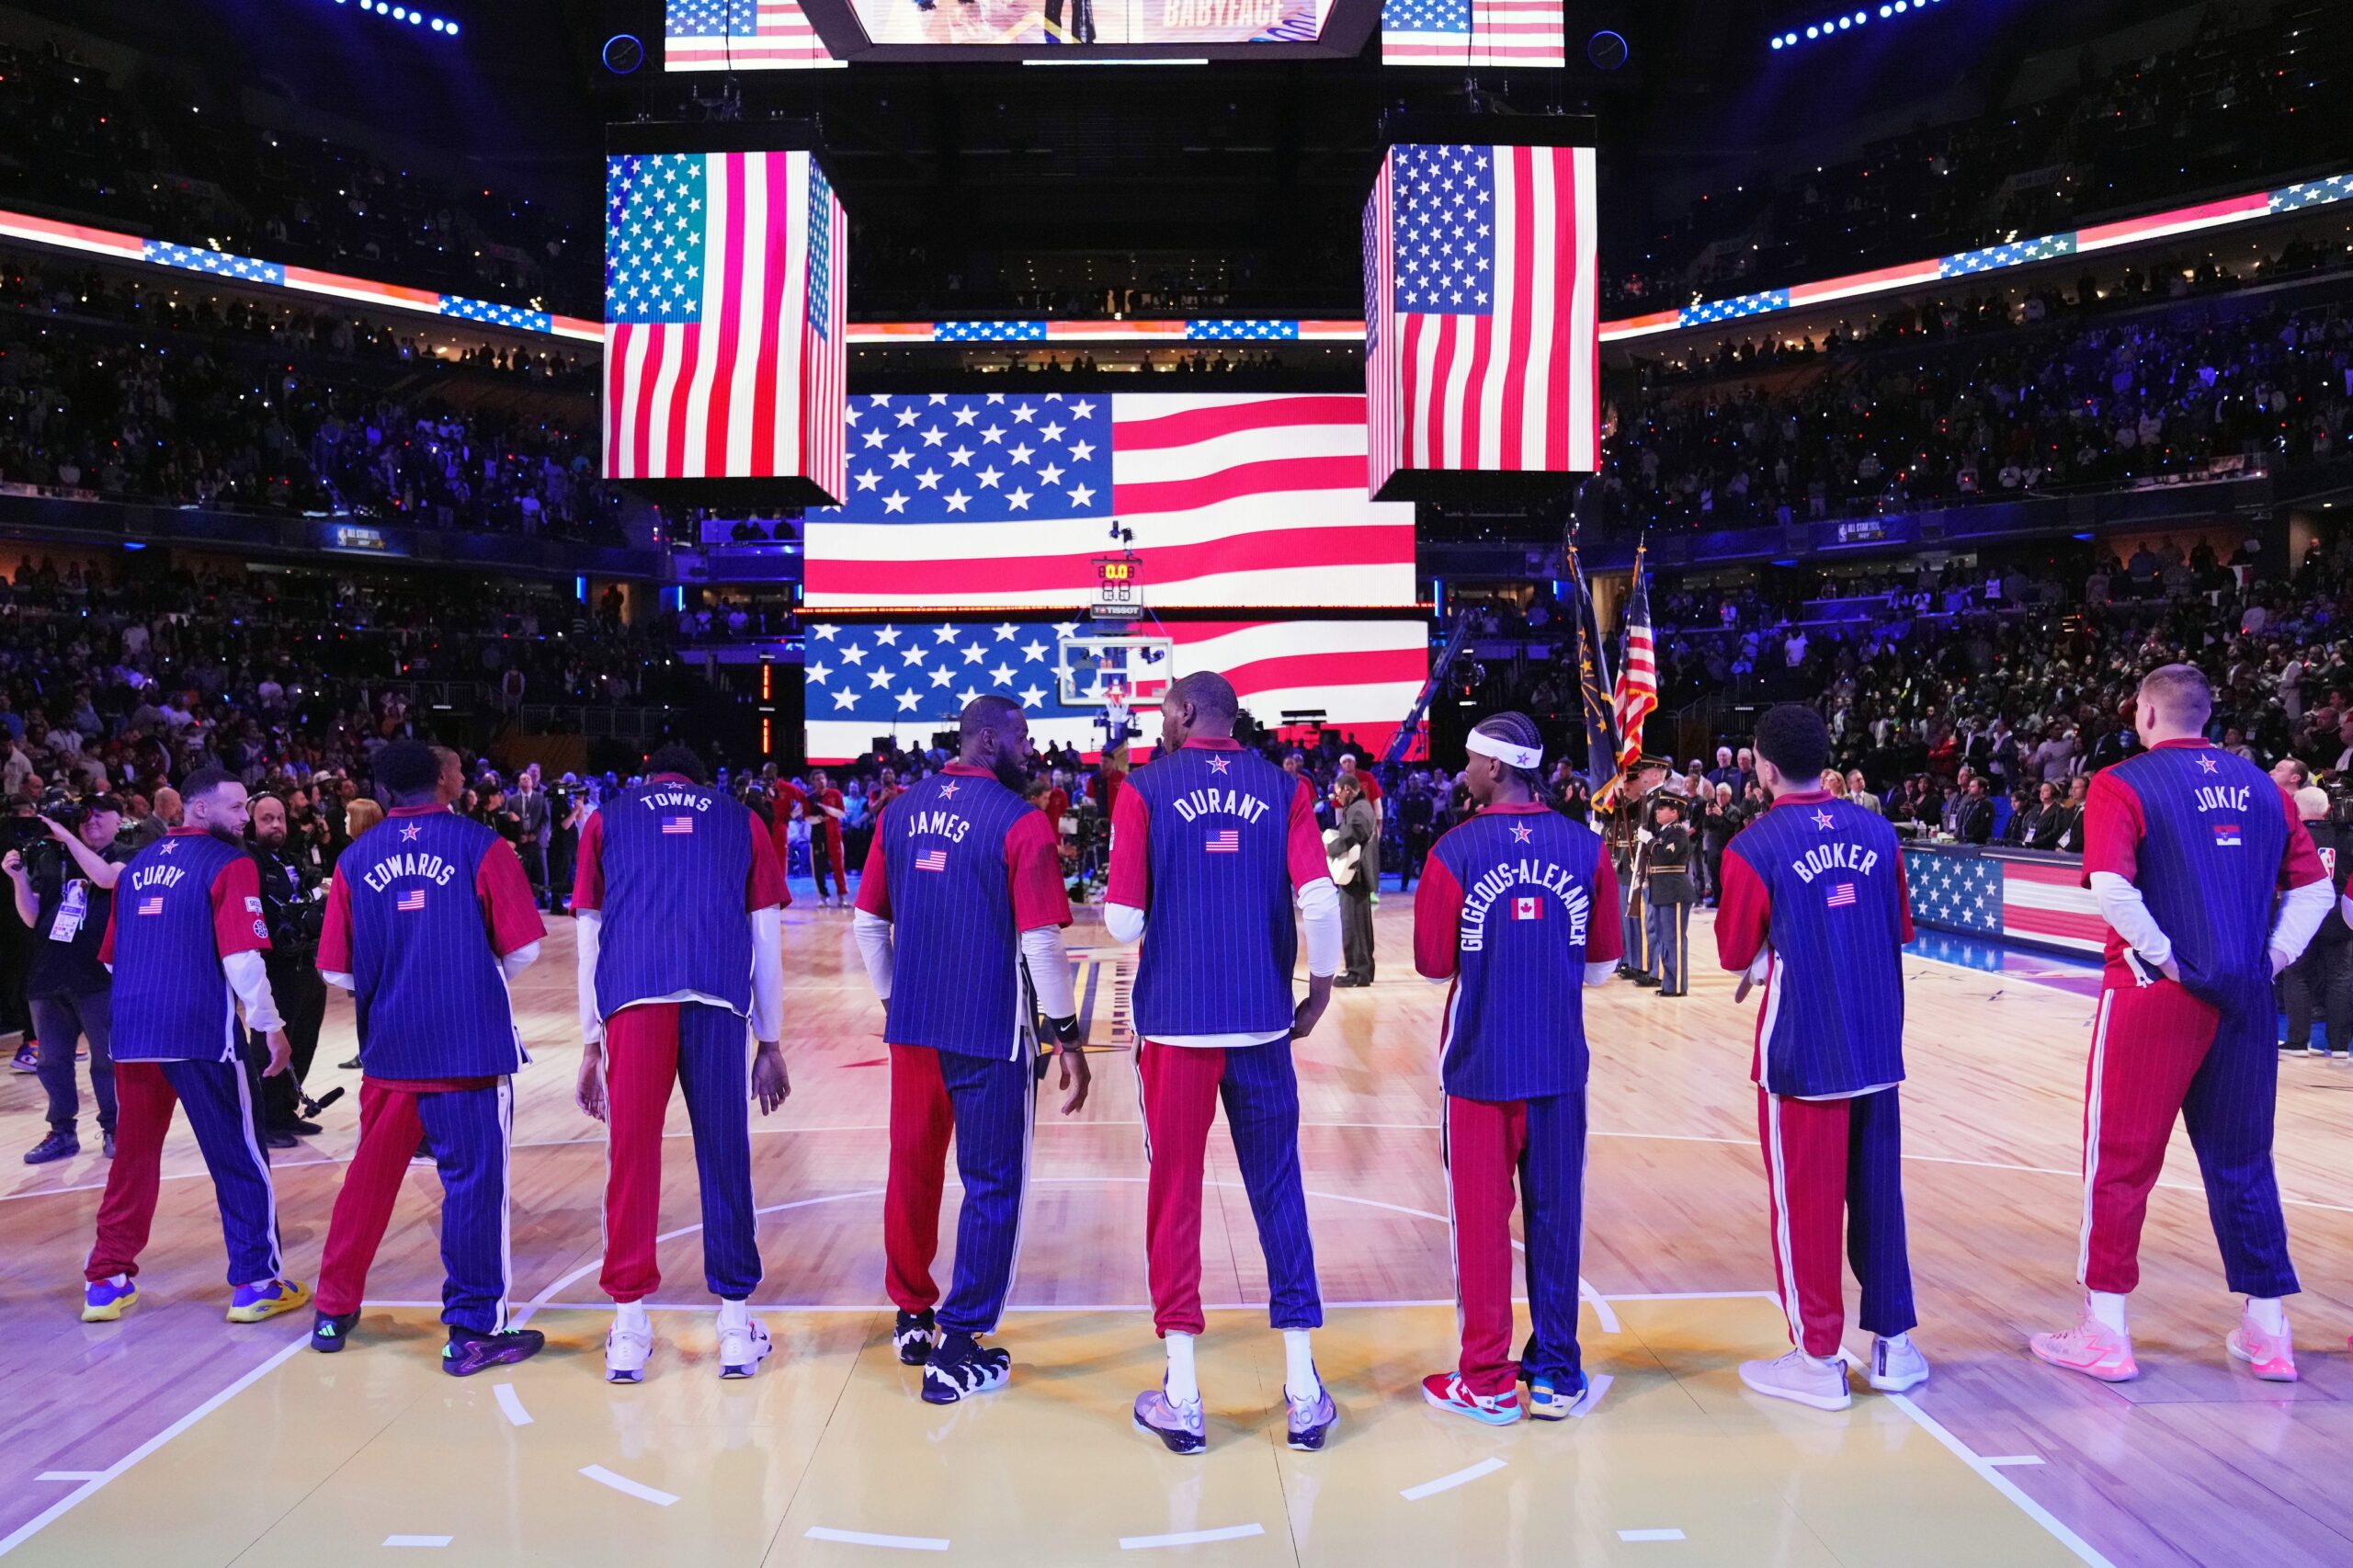 USA vs. World: Pros and Cons of Proposed All-Star Game Change